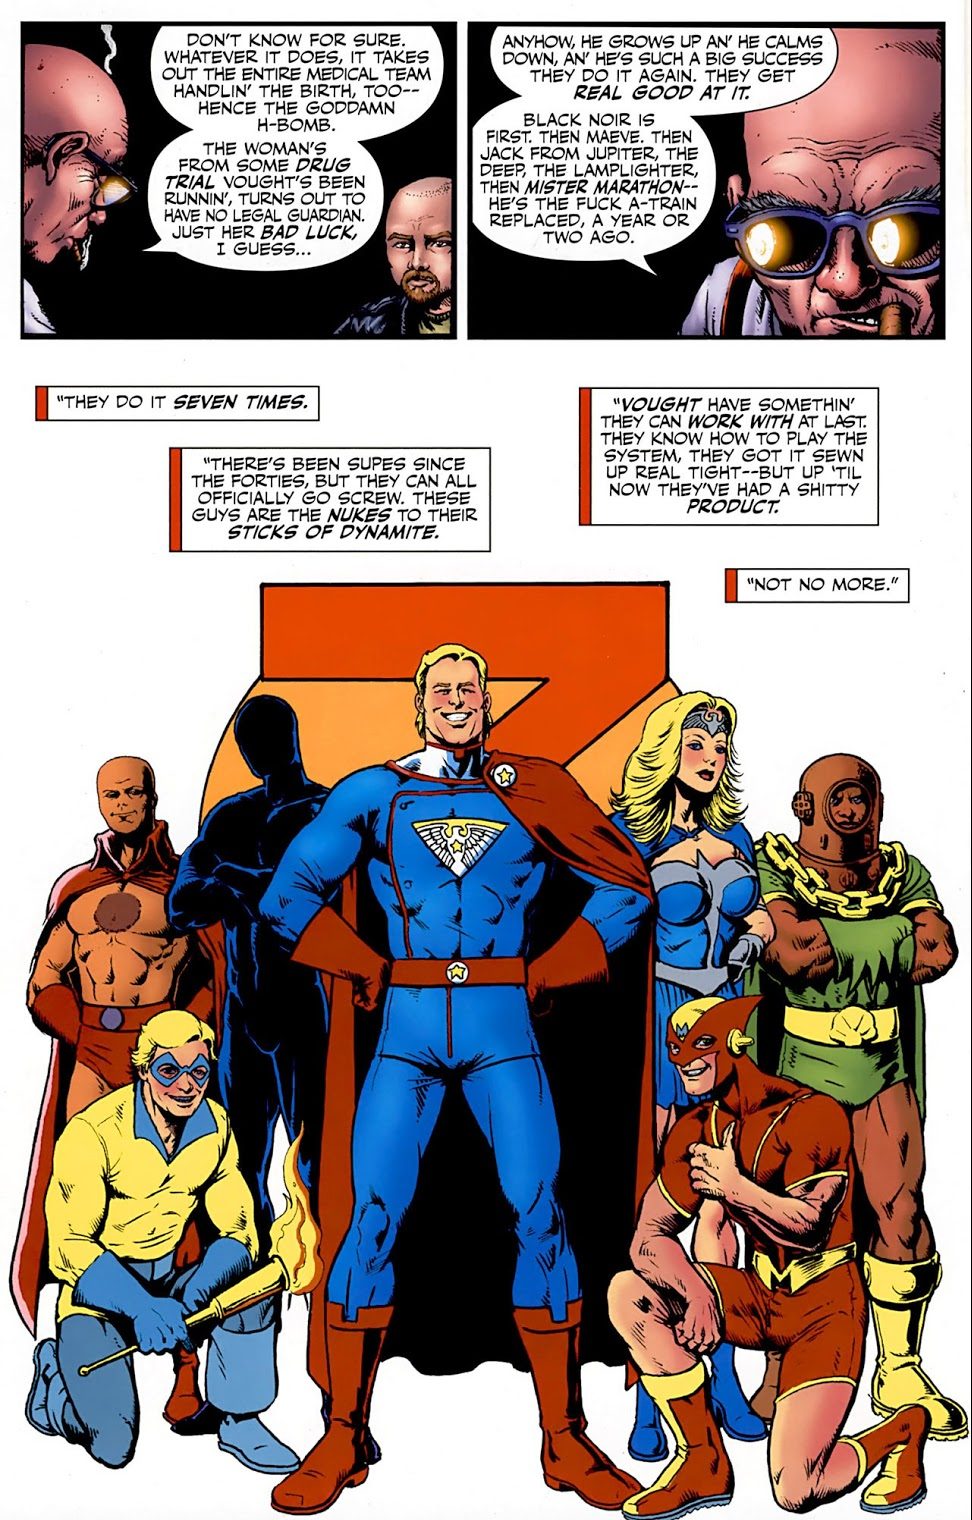 The Origin Story Of Homelander And The Seven